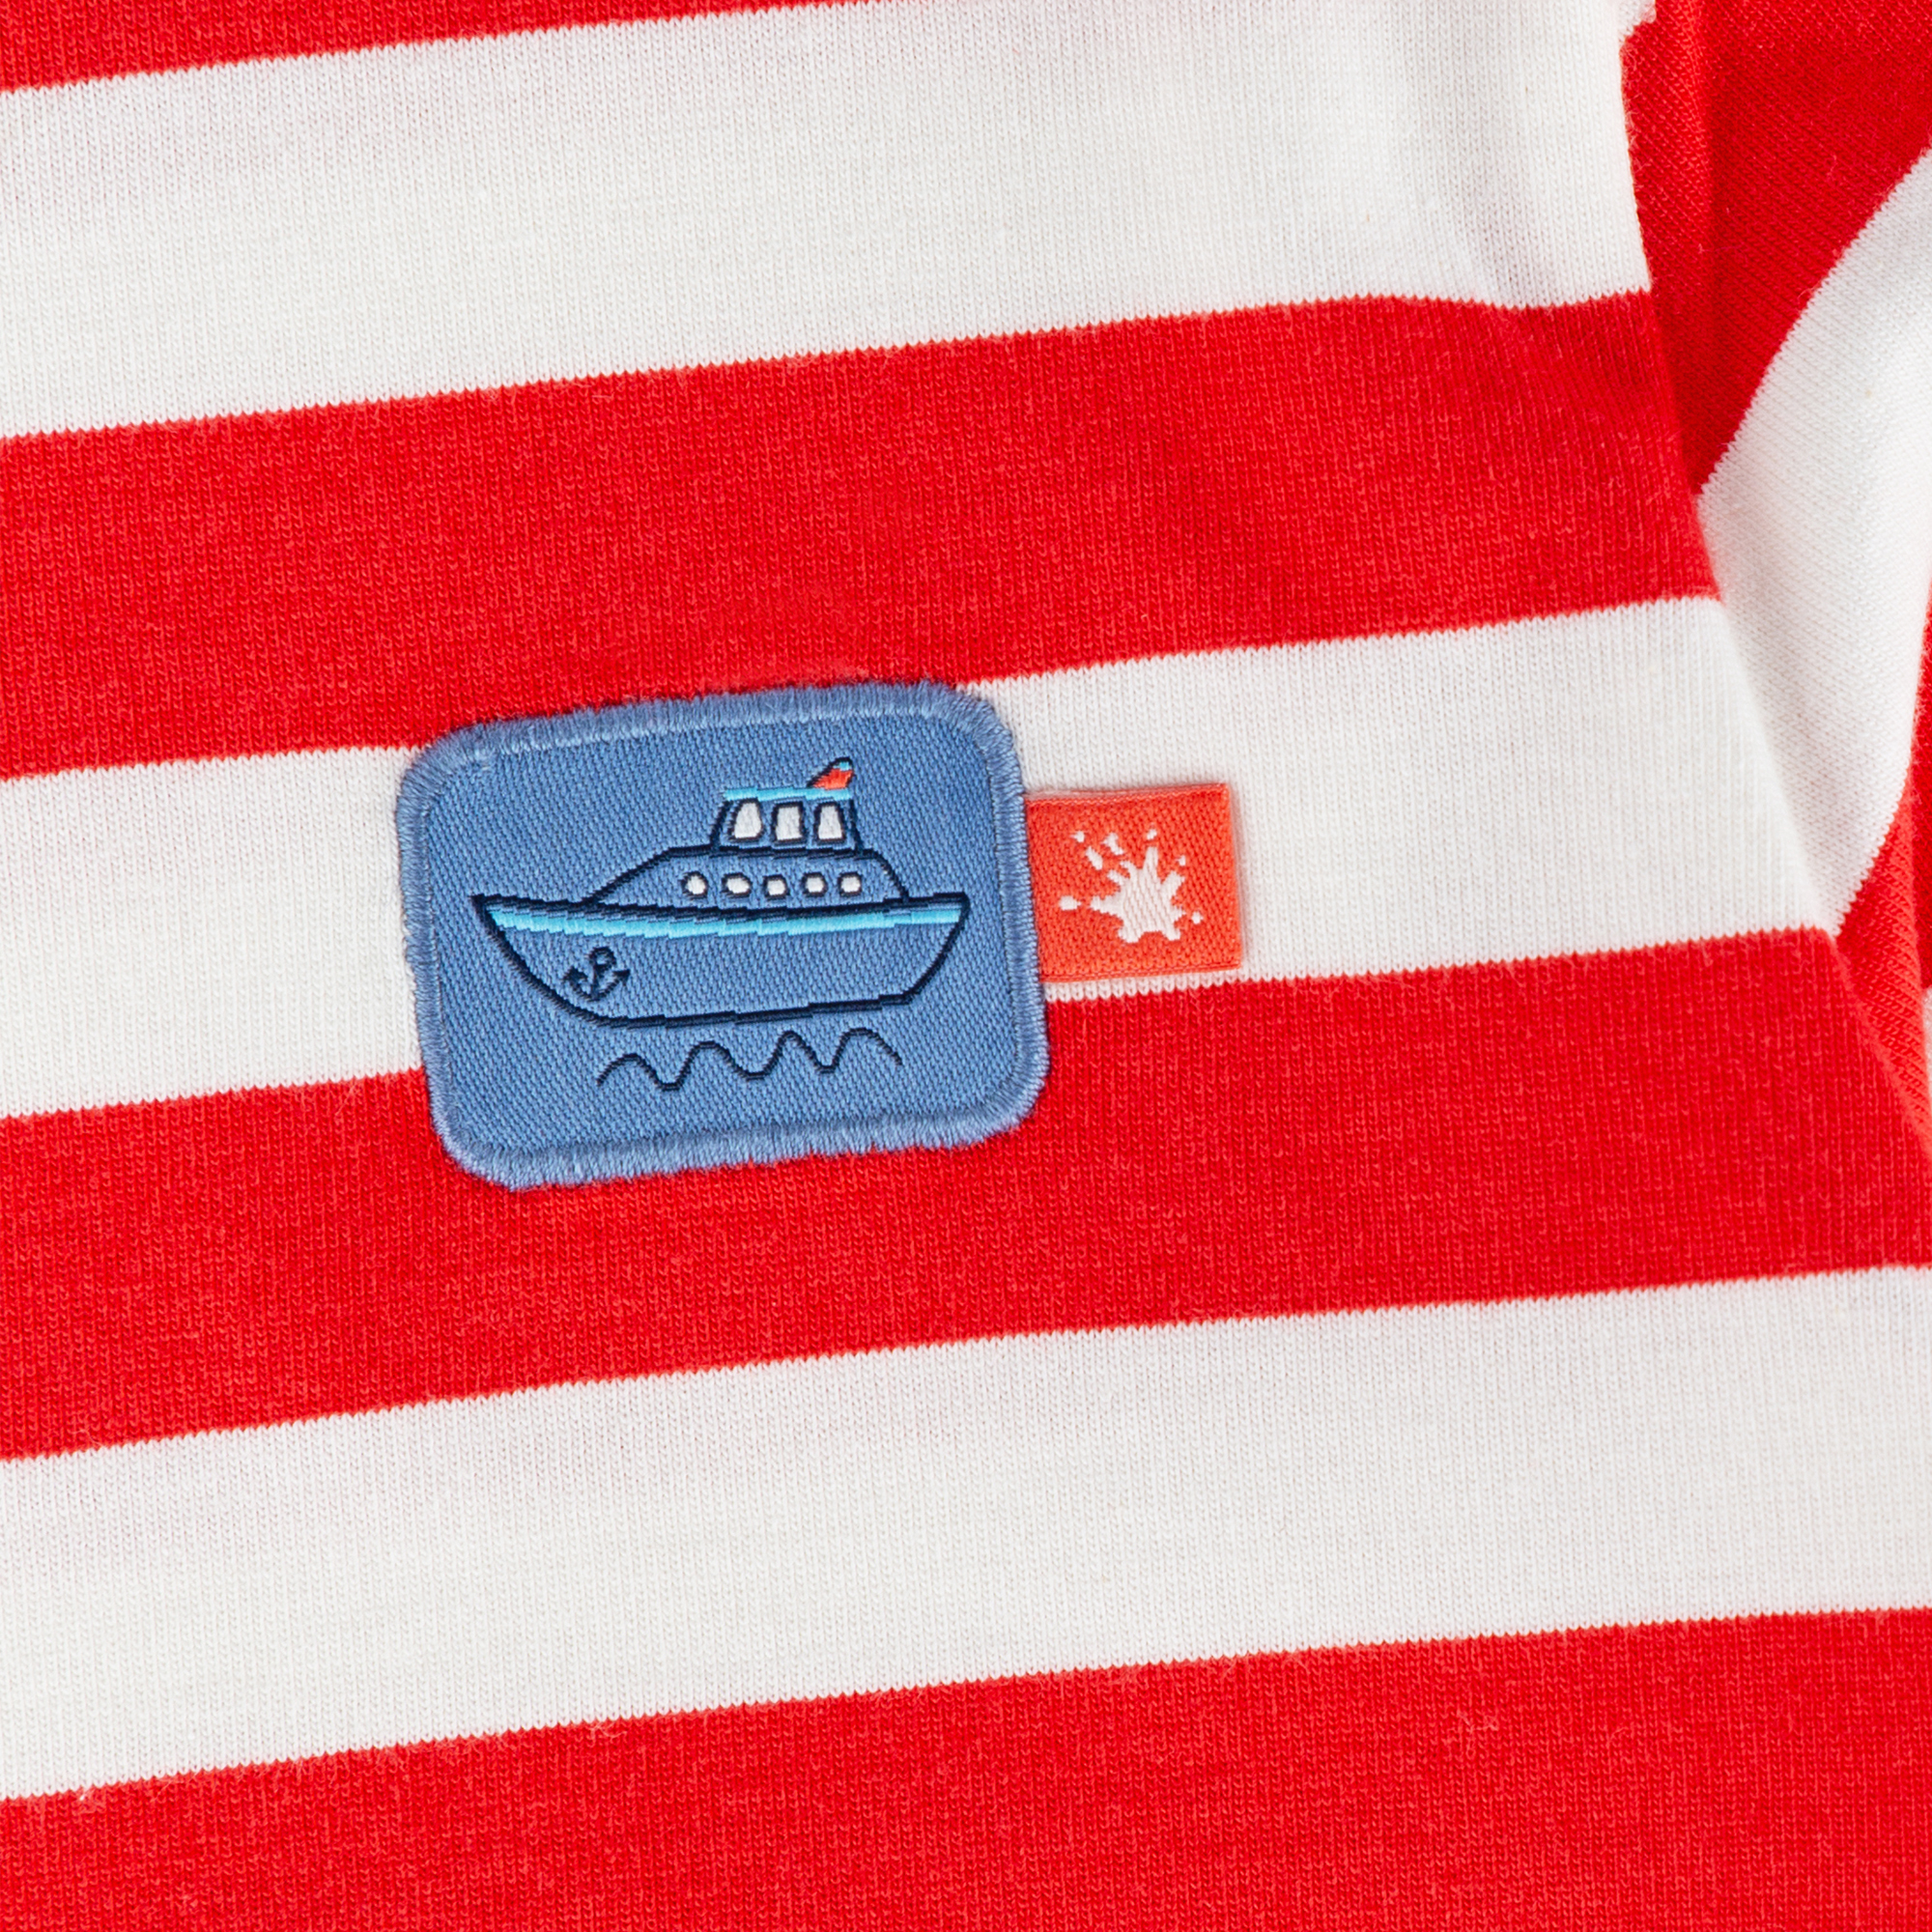 Red/white striped children's long sleeve Tee boat patch